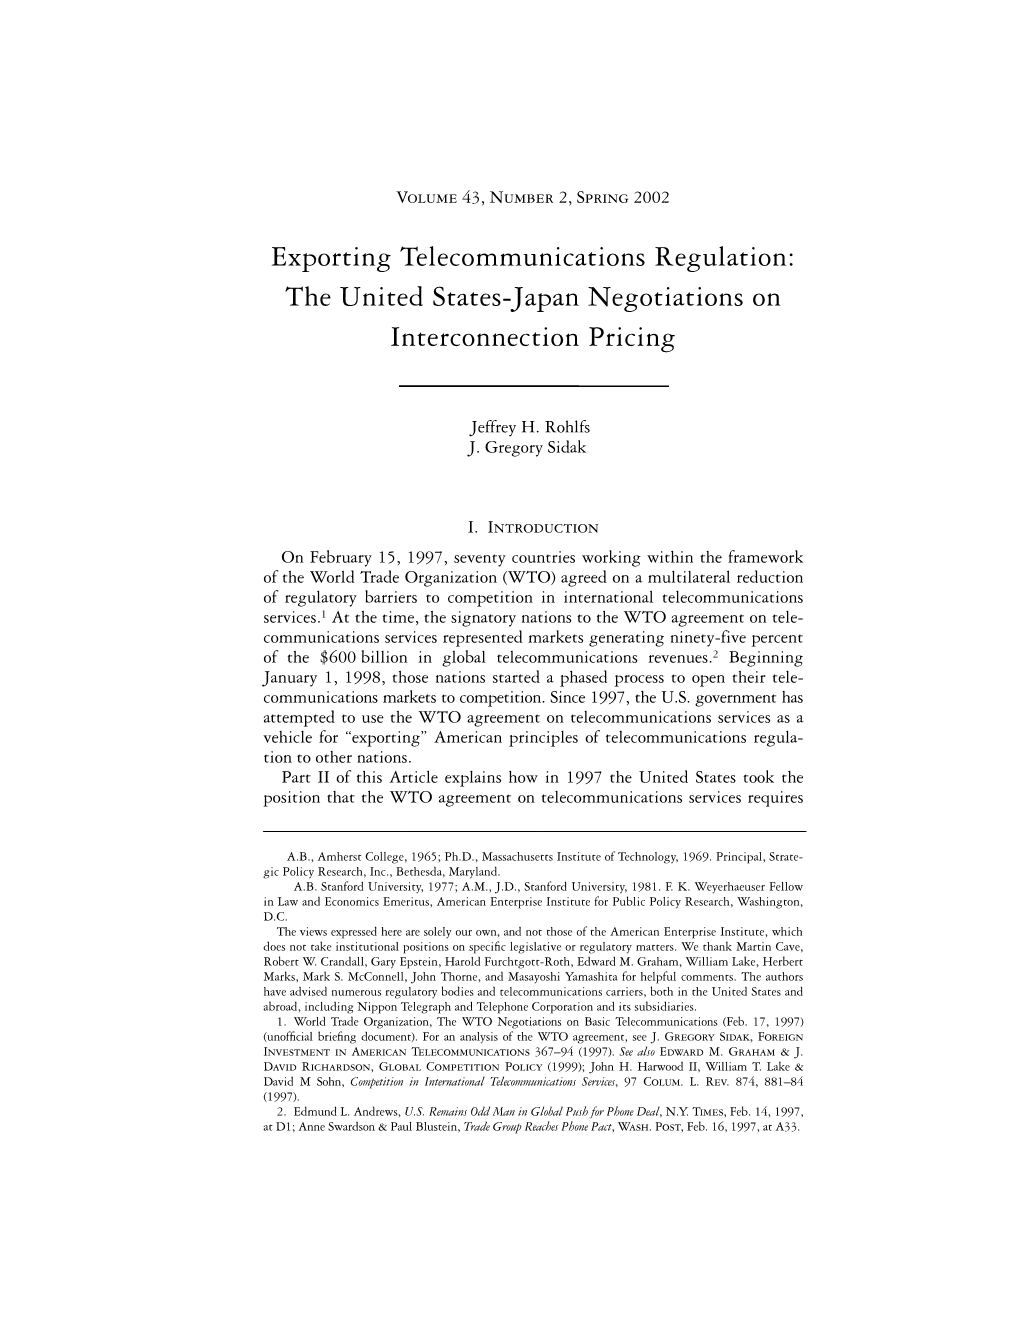 The United States-Japan Negotiations on Interconnection Pricing